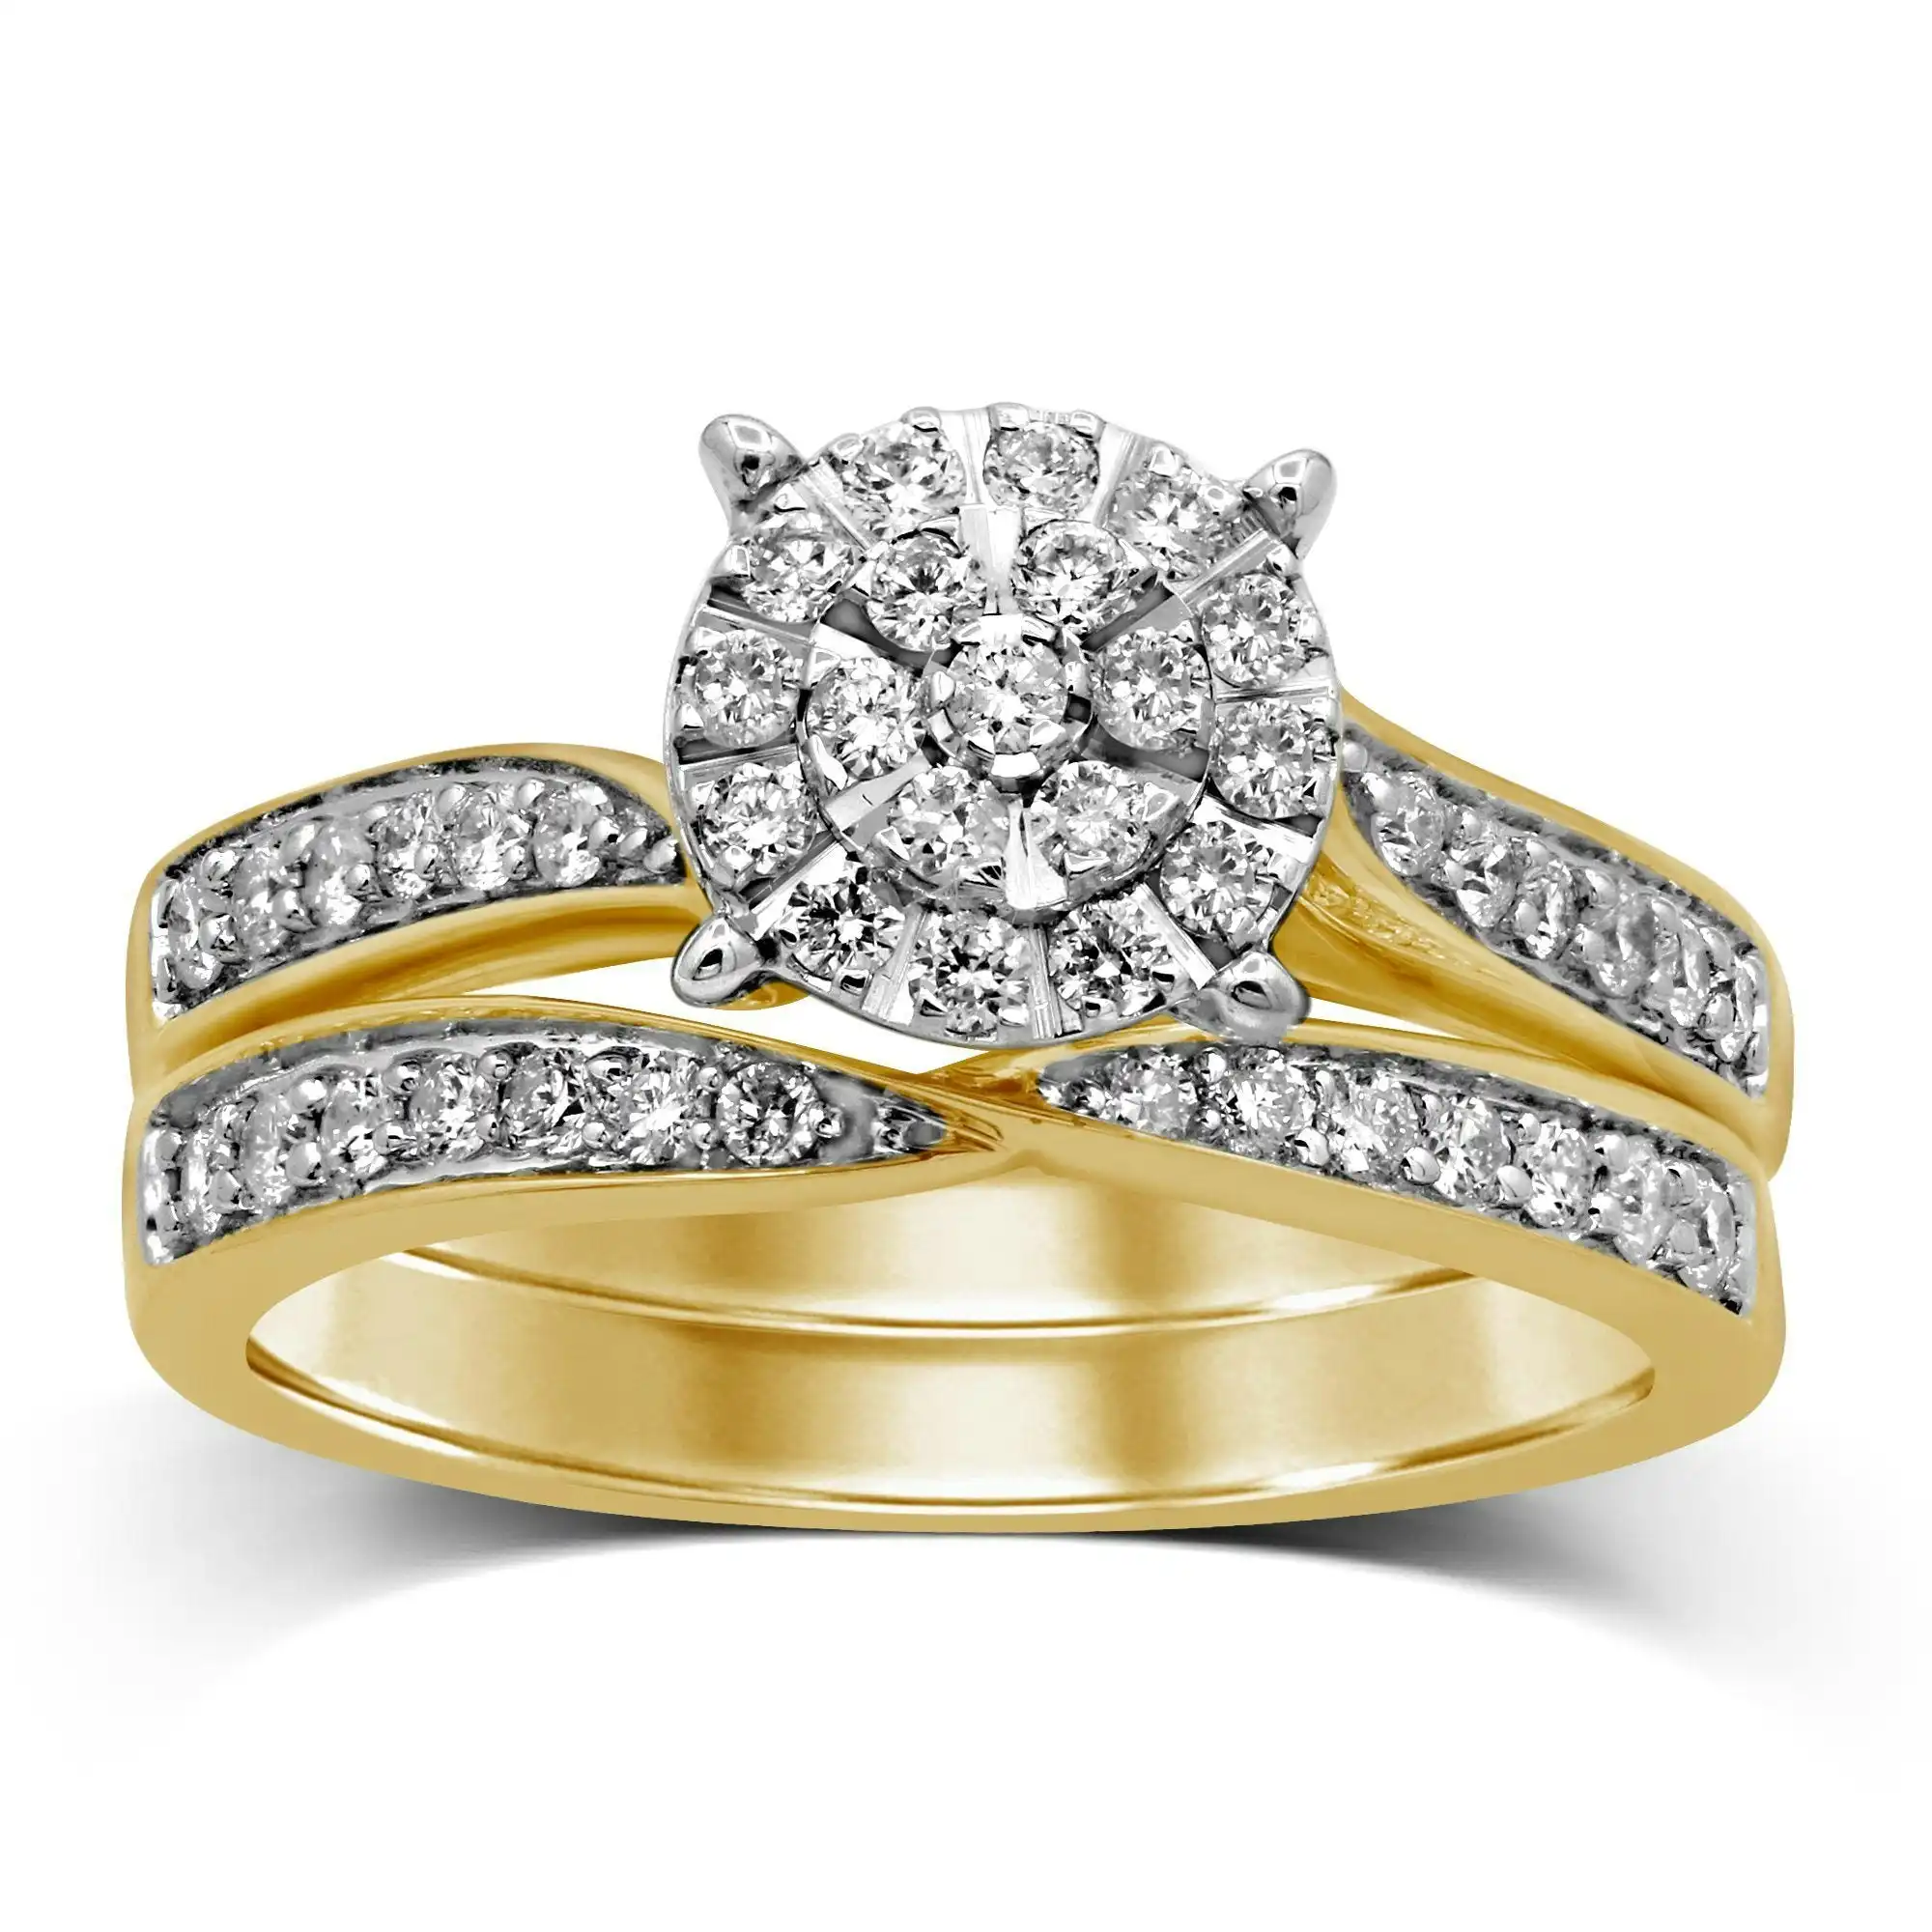 Brilliant Solitaire Look Two Ring Set with 1/2ct of Diamonds in 9ct Yellow Gold